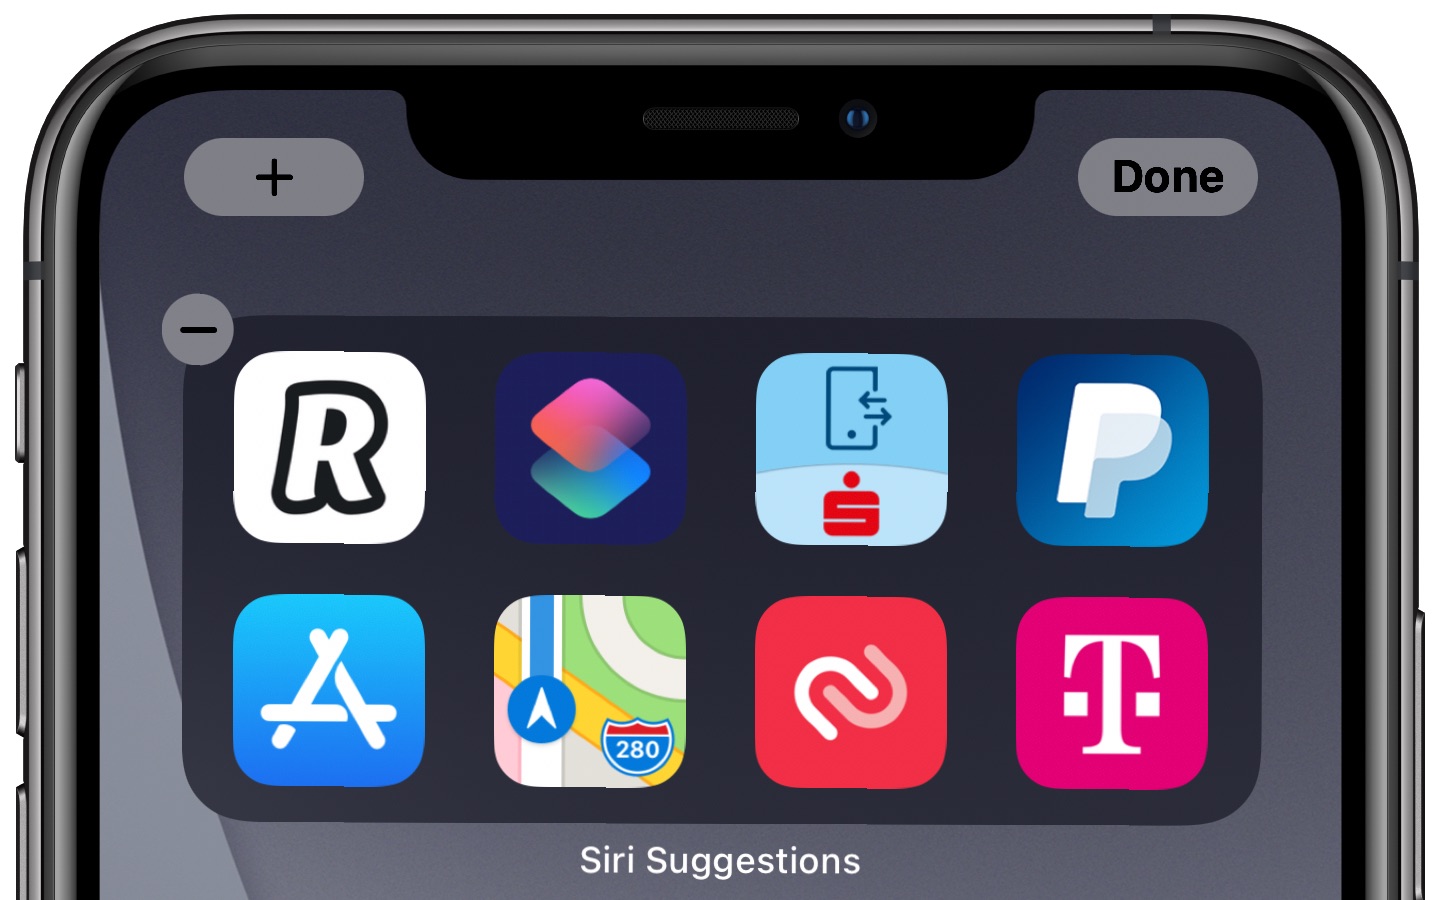 Siri Suggestions widget - an example of suggested apps on the iPhone home screen